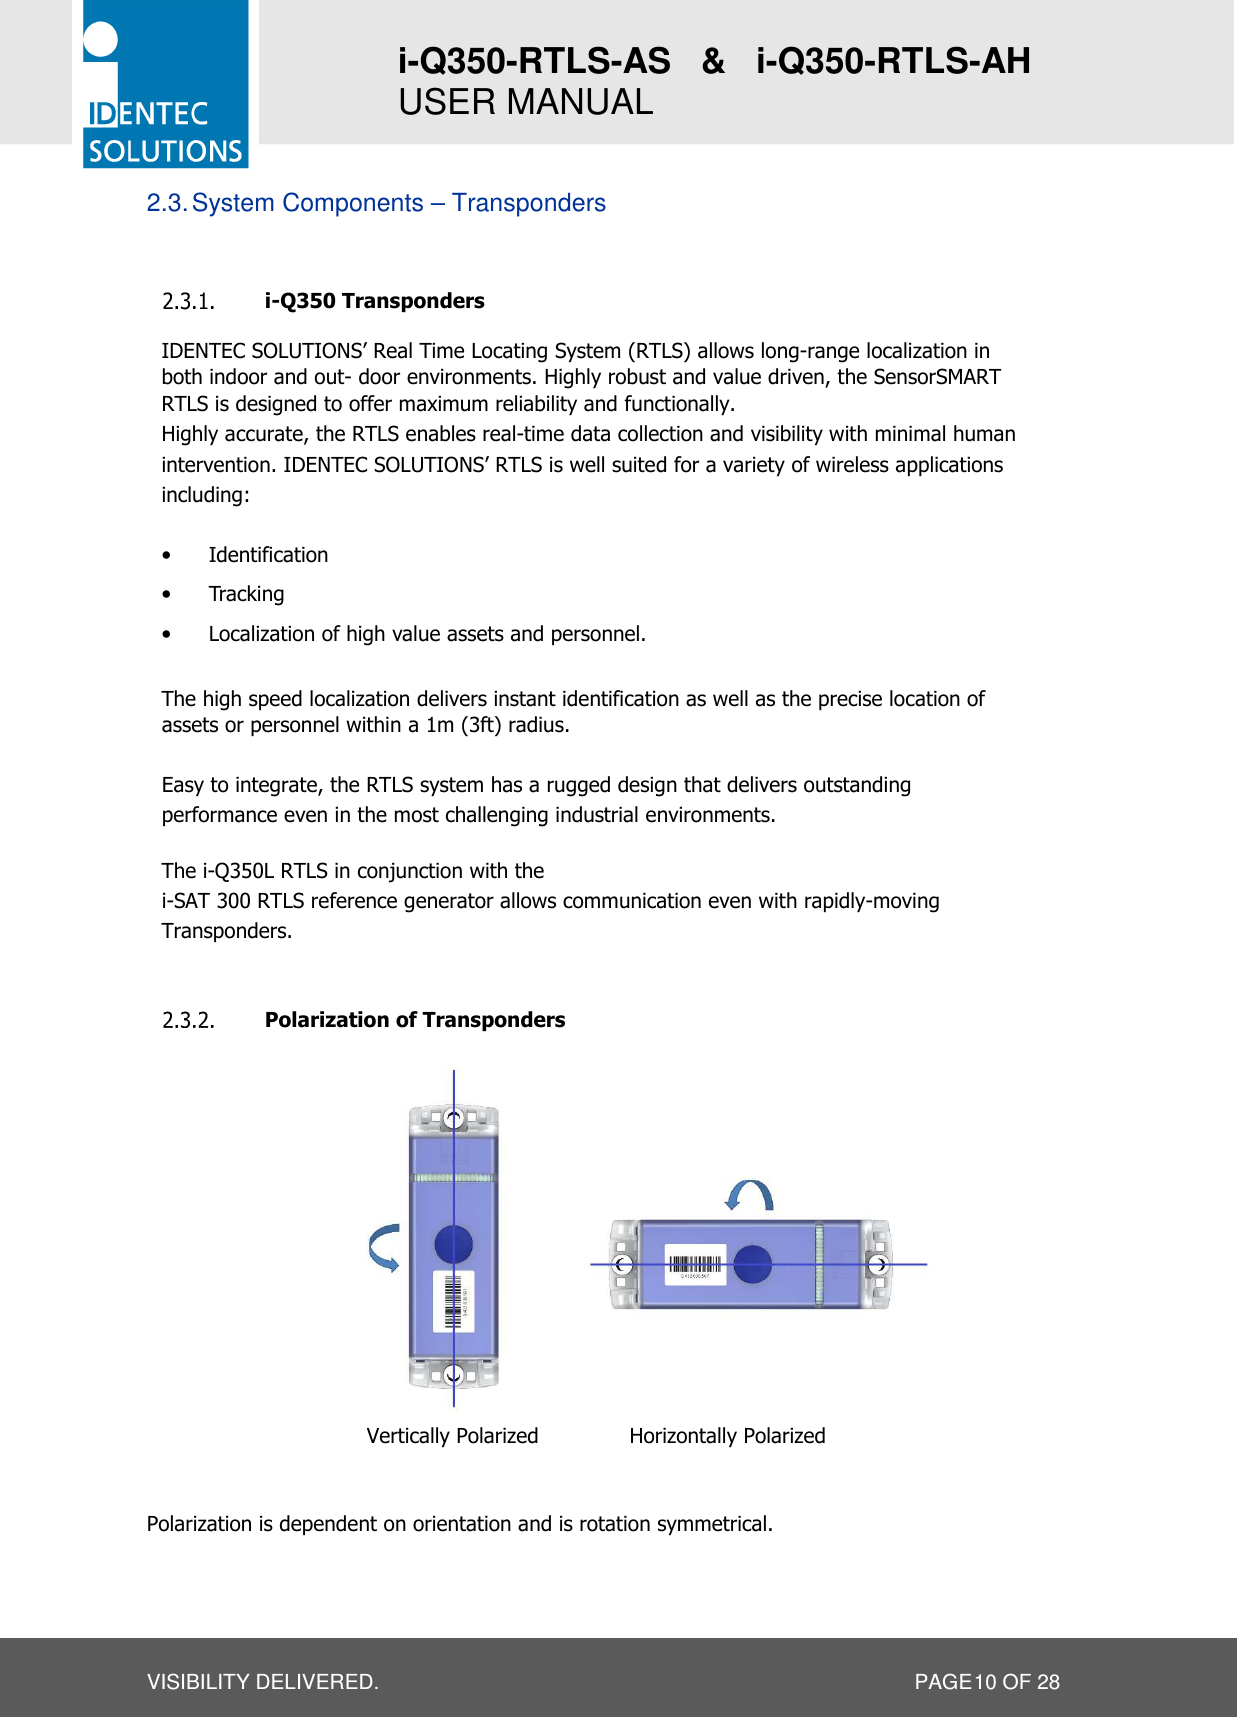 i-Q350-RTLS-AS   &amp;   i-Q350-RTLS-AH   USER MANUAL  VISIBILITY DELIVERED.                   PAGE 10 OF 28 2.3. System Components – Transponders   i-Q350 Transponders IDENTEC SOLUTIONS’ Real Time Locating System (RTLS) allows long-range localization in both indoor and out- door environments. Highly robust and value driven, the SensorSMART RTLS is designed to offer maximum reliability and functionally. Highly accurate, the RTLS enables real-time data collection and visibility with minimal human intervention. IDENTEC SOLUTIONS’ RTLS is well suited for a variety of wireless applications including:  • Identification • Tracking • Localization of high value assets and personnel.  The high speed localization delivers instant identification as well as the precise location of assets or personnel within a 1m (3ft) radius.  Easy to integrate, the RTLS system has a rugged design that delivers outstanding performance even in the most challenging industrial environments.  The i-Q350L RTLS in conjunction with the i-SAT 300 RTLS reference generator allows communication even with rapidly-moving Transponders.   Polarization of Transponders                                     Polarization is dependent on orientation and is rotation symmetrical.       Vertically Polarized  Horizontally Polarized 